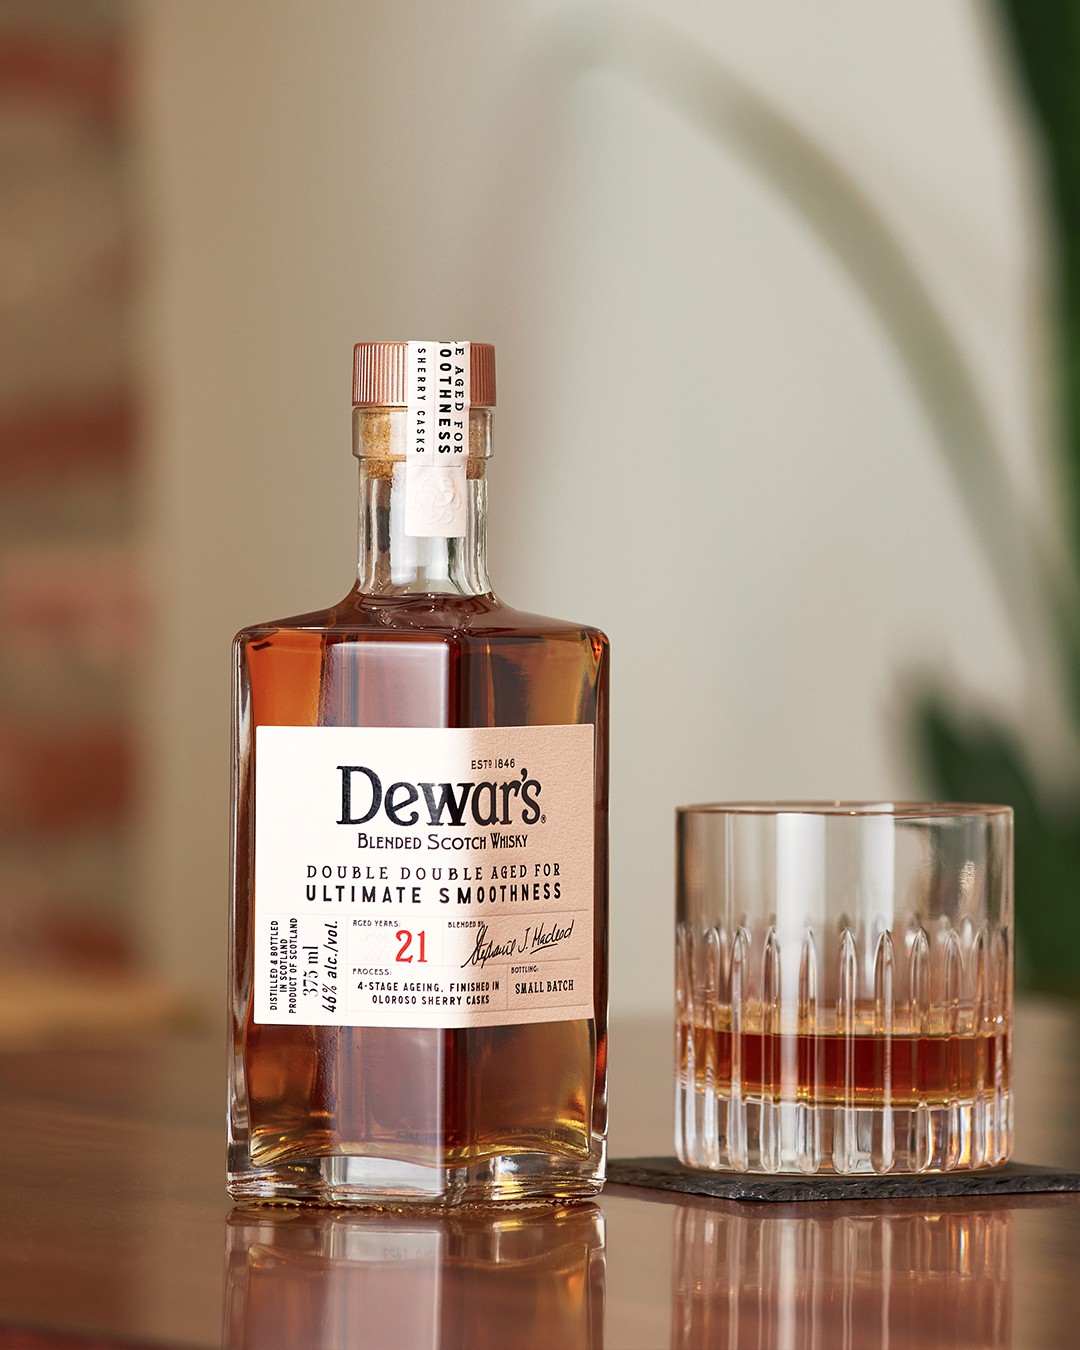 If you haven't tried the youngest of 3 whiskies in the Dewar’s Double Double series, this 21-Year is an absolute must try. Their unique 4-stage aging process is a testament to the care and craftsmanship required to make such a fine whisky. Scored the Double Double 21 94 points when I tasted it! 

#whiskycastsponsor #dewars #scotch